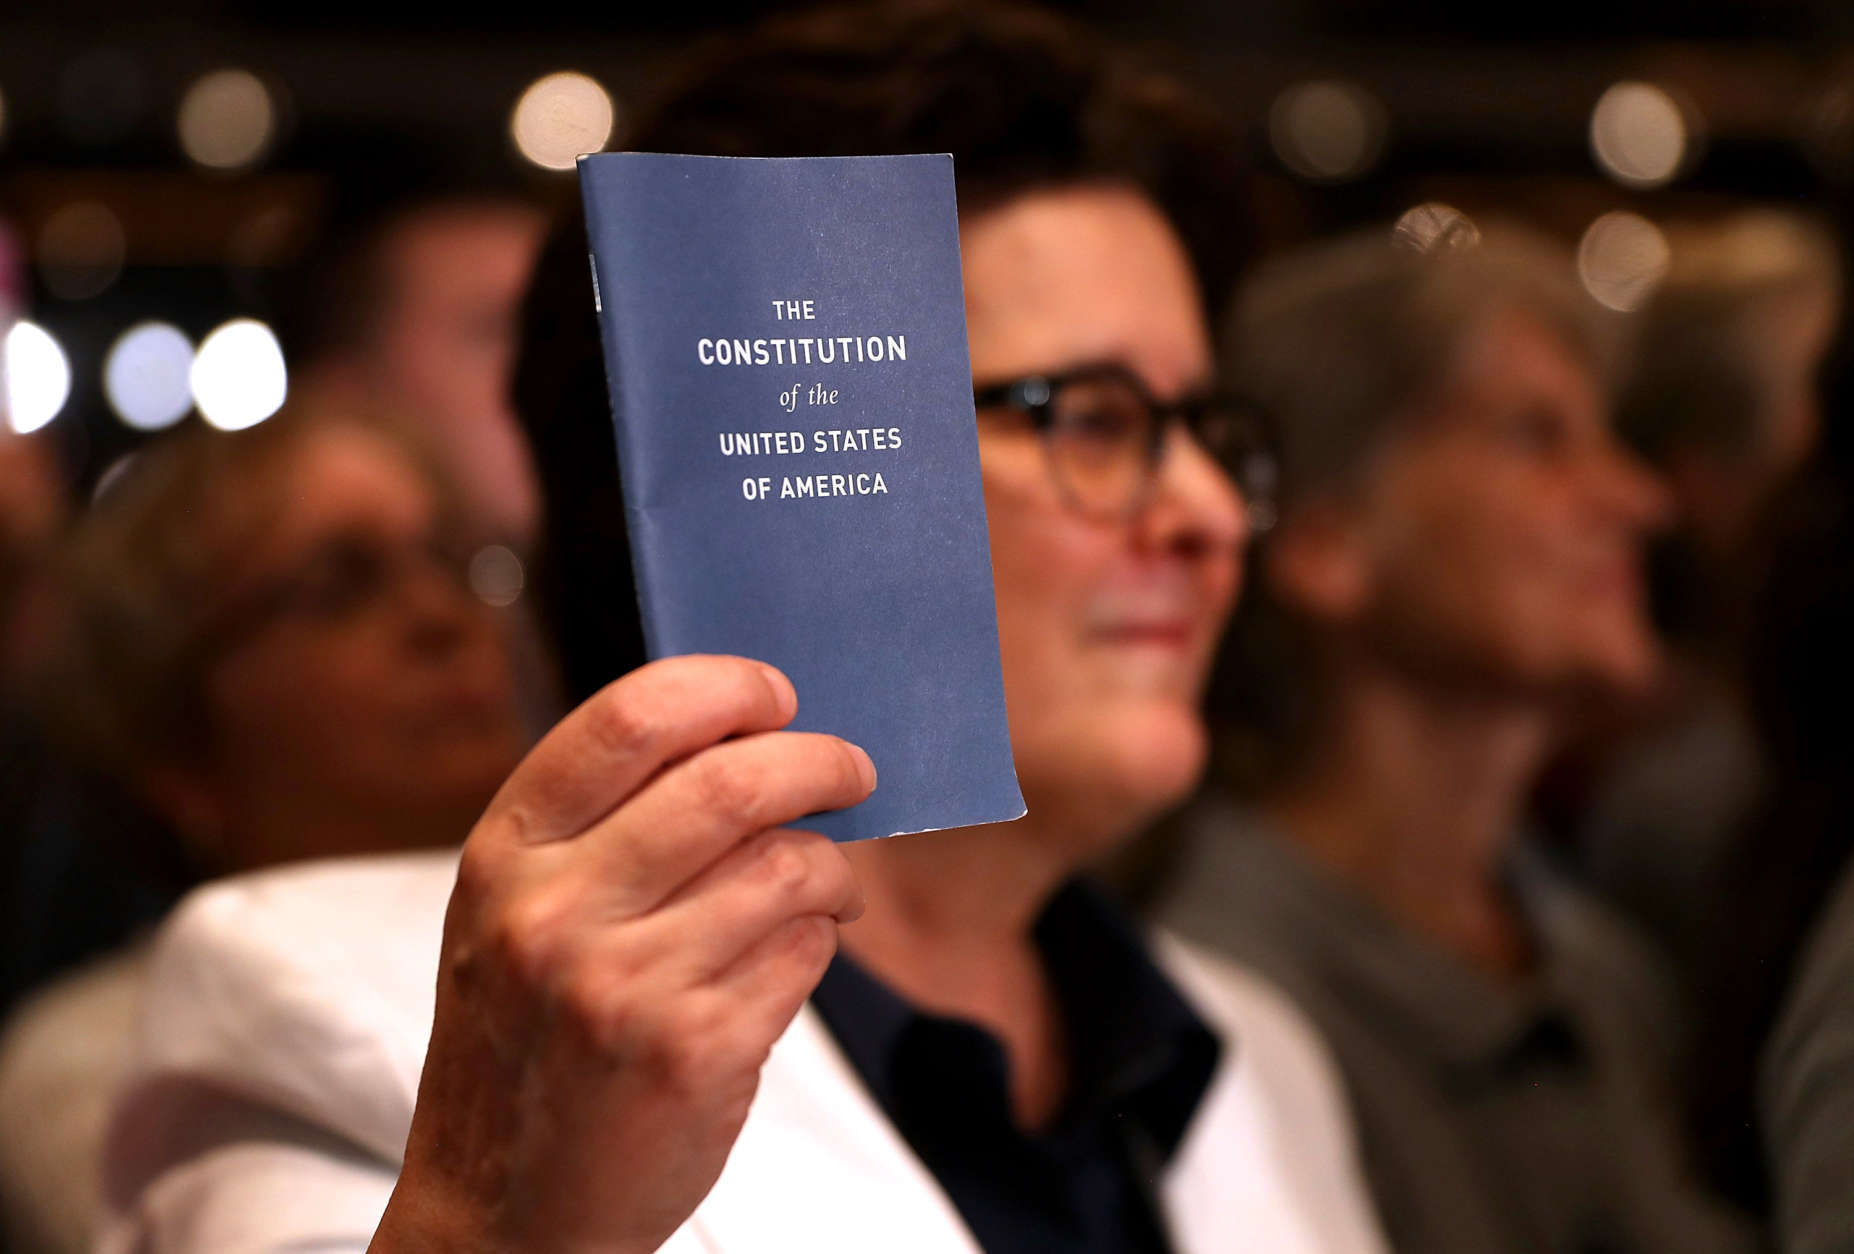 MANCHESTER, NH - NOVEMBER 06:  A supporter holds a copy of the U.S. Constitution during a campaign rally with Democratic presidential nominee former Secretary of State Hillary Clinton at The Armory on November 6, 2016 in Manchester, New Hampshire. With two days to go until election day, Hillary Clinton is campaigning in Florida and Pennsylvania.  (Photo by Justin Sullivan/Getty Images)